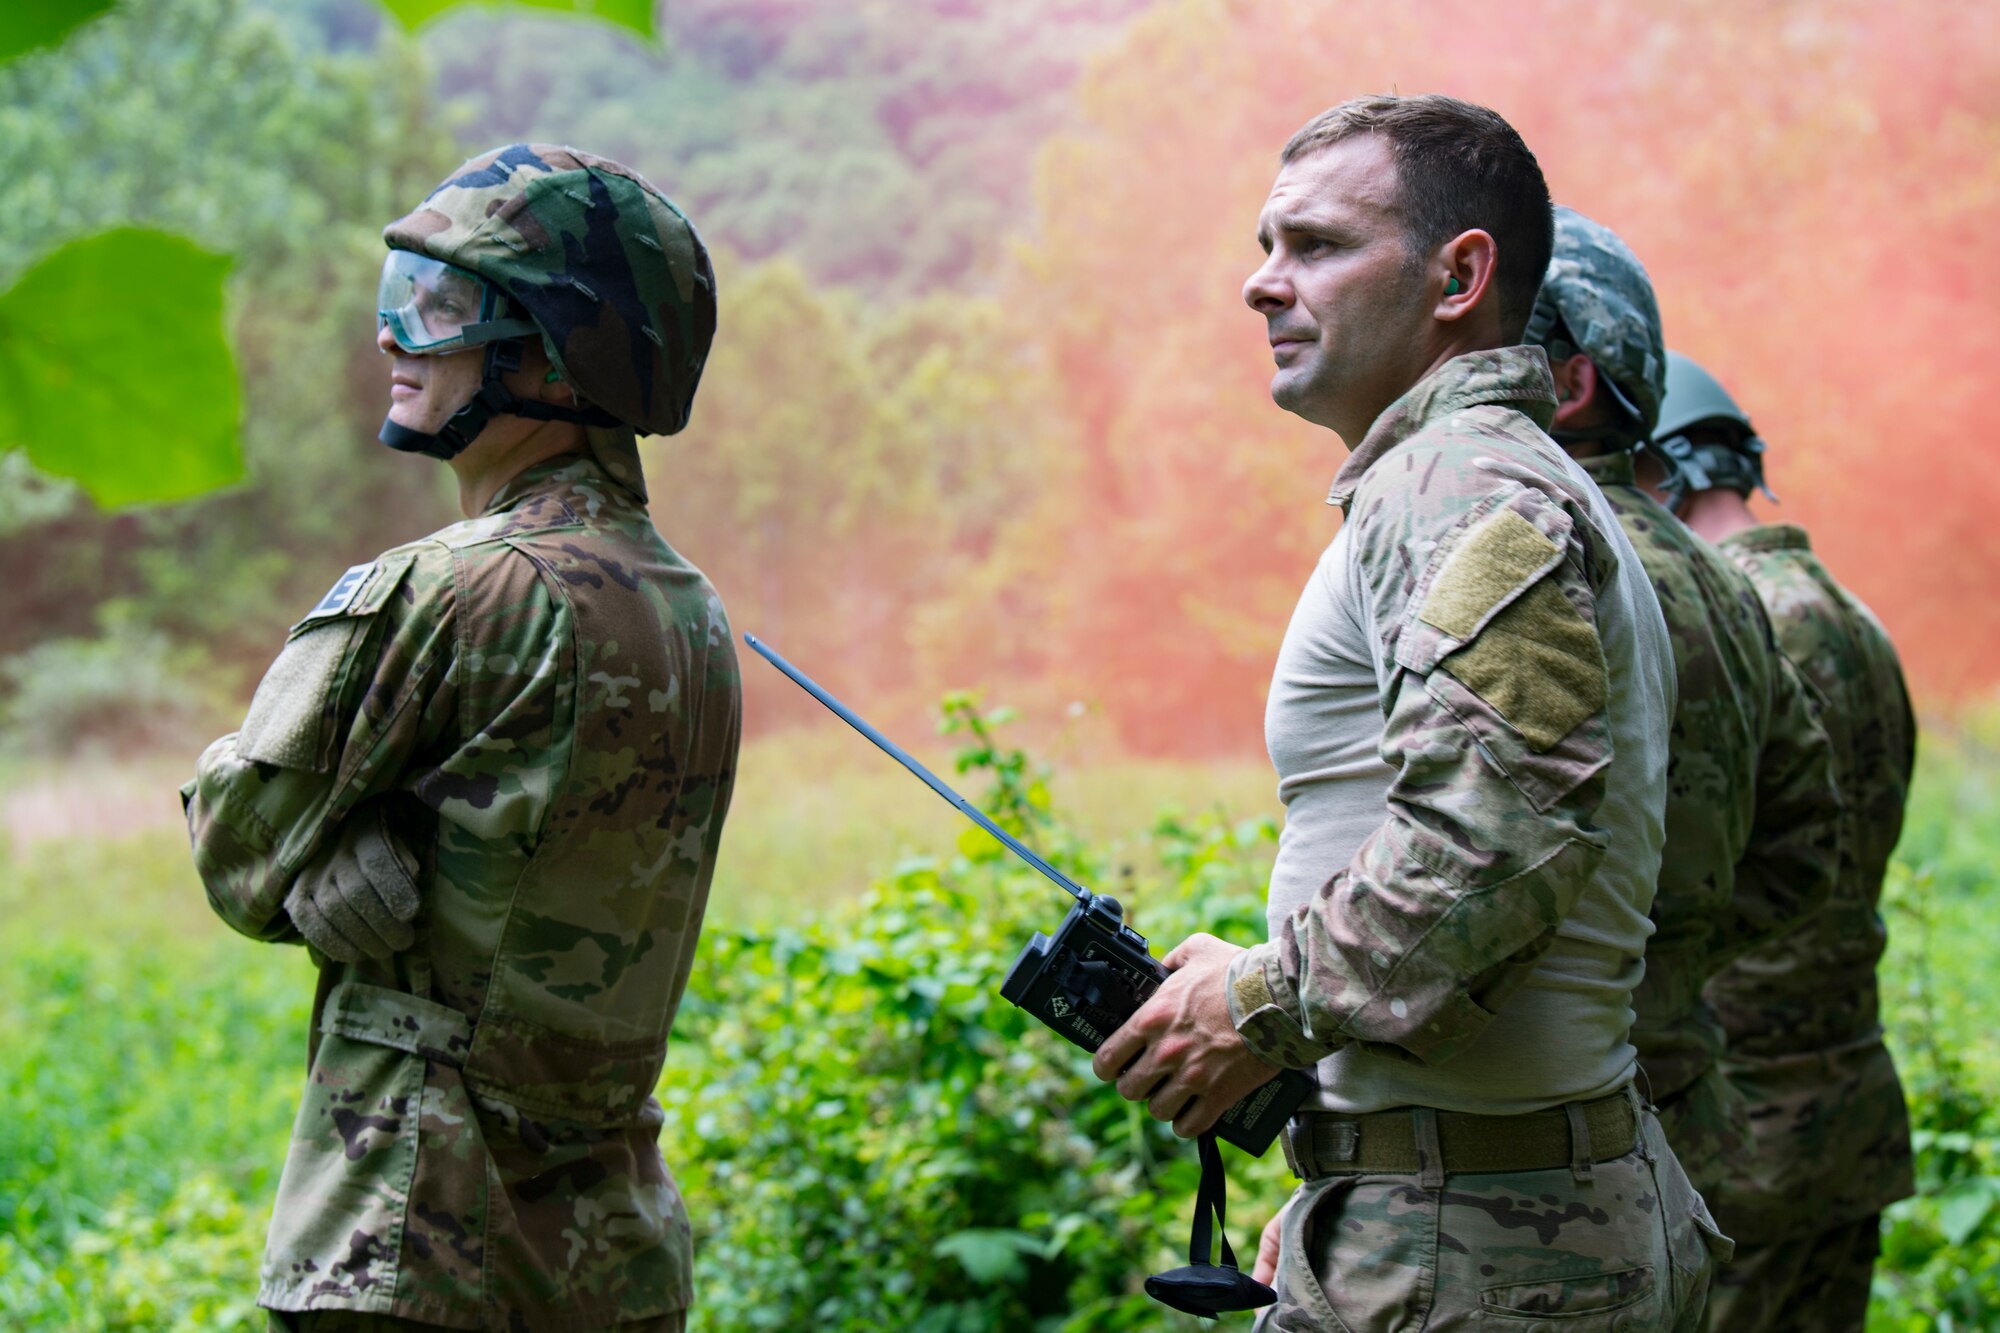 Operations Group Airmen prepare to be evacuated while participating in Survival, Evasion, Resistance and Escape (SERE) training June 2, 2018 at Alum Creek, W.Va.The Airmen completed a refresher version of the original SERE course, which is required every three years, to ensure that in case of emergency that they would have the competency to survive in numerous hostile conditions. (U.